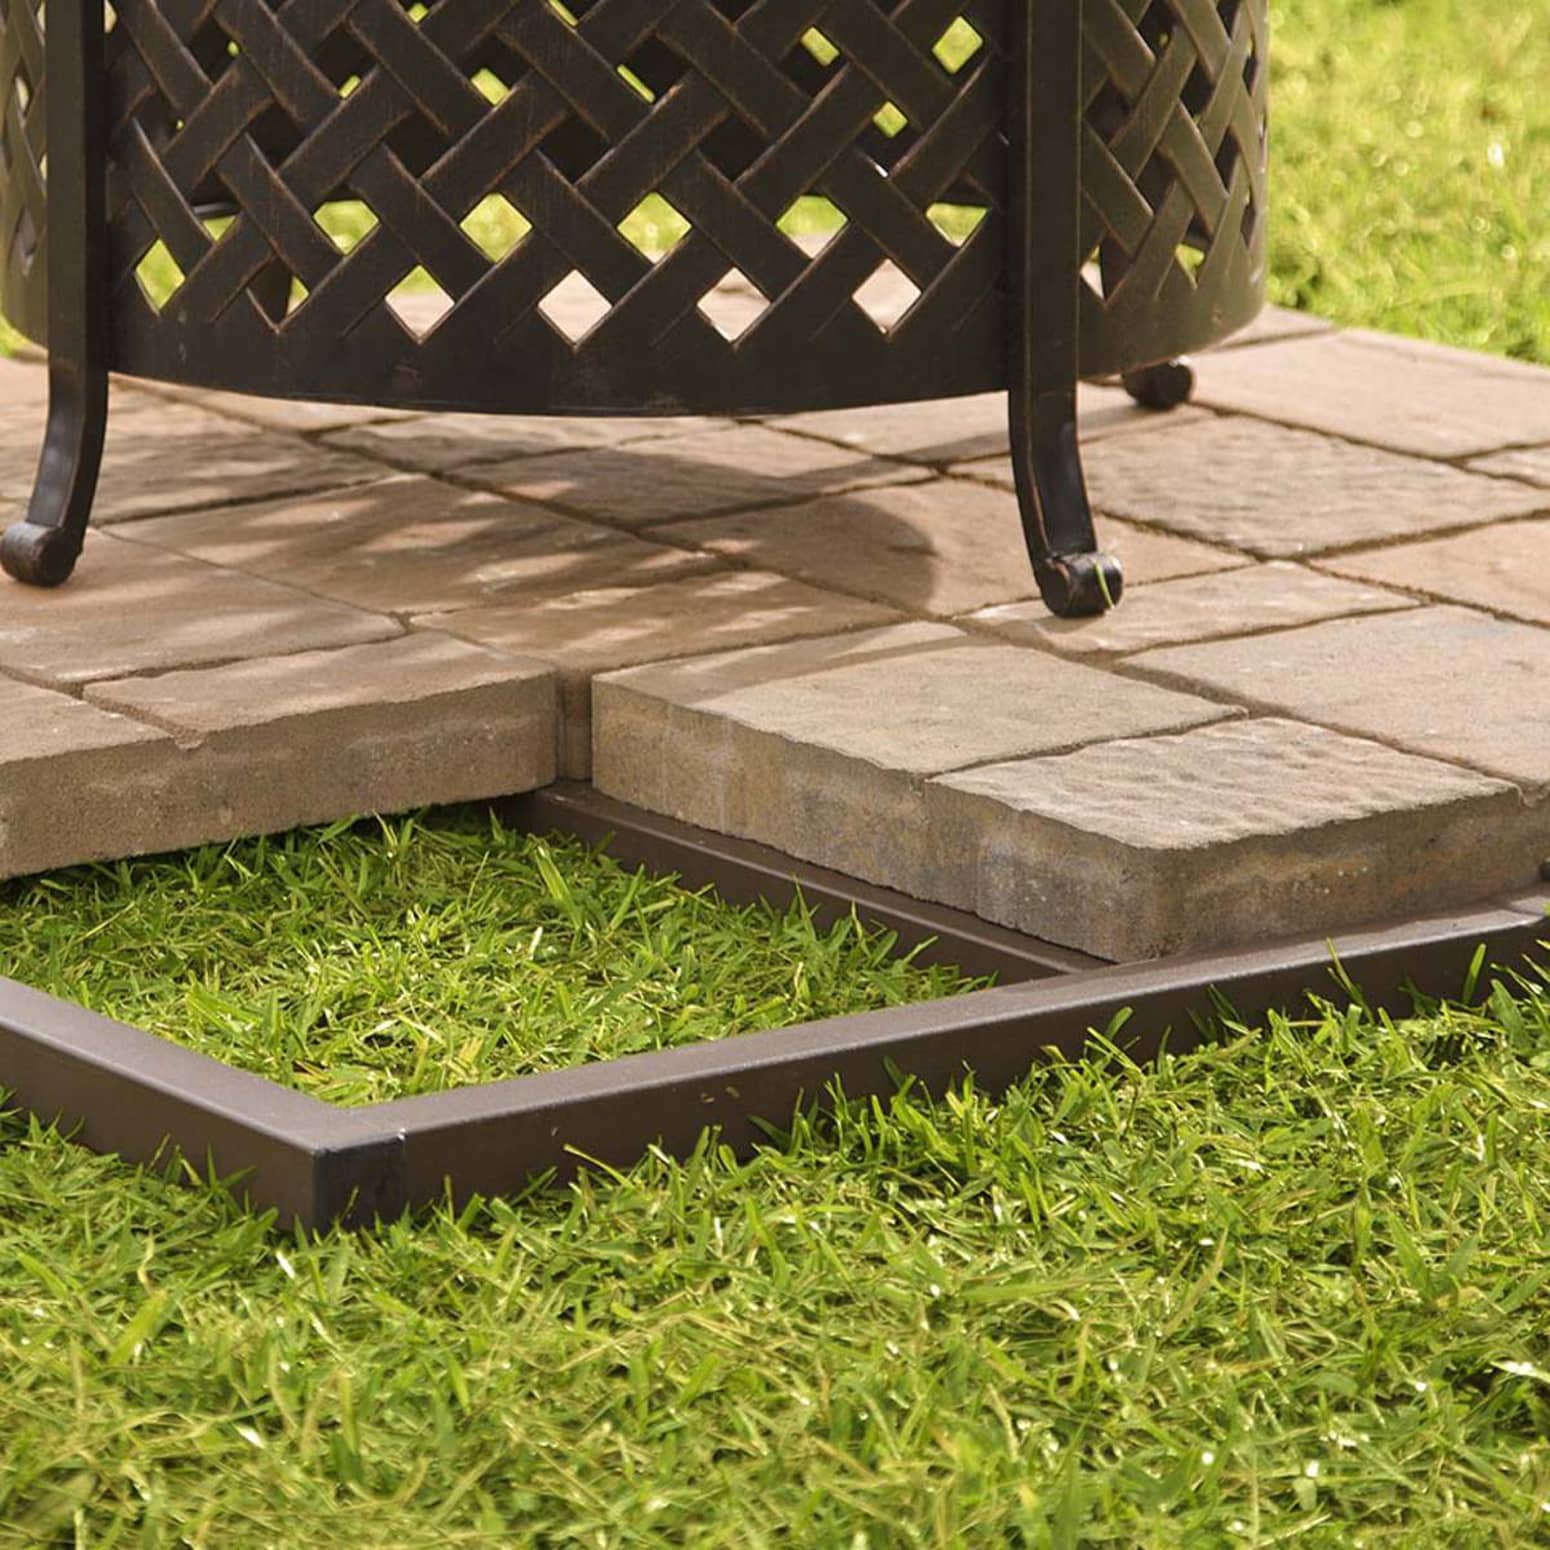 Fire Pit Safety Base, Fire Pit Mat For Grass